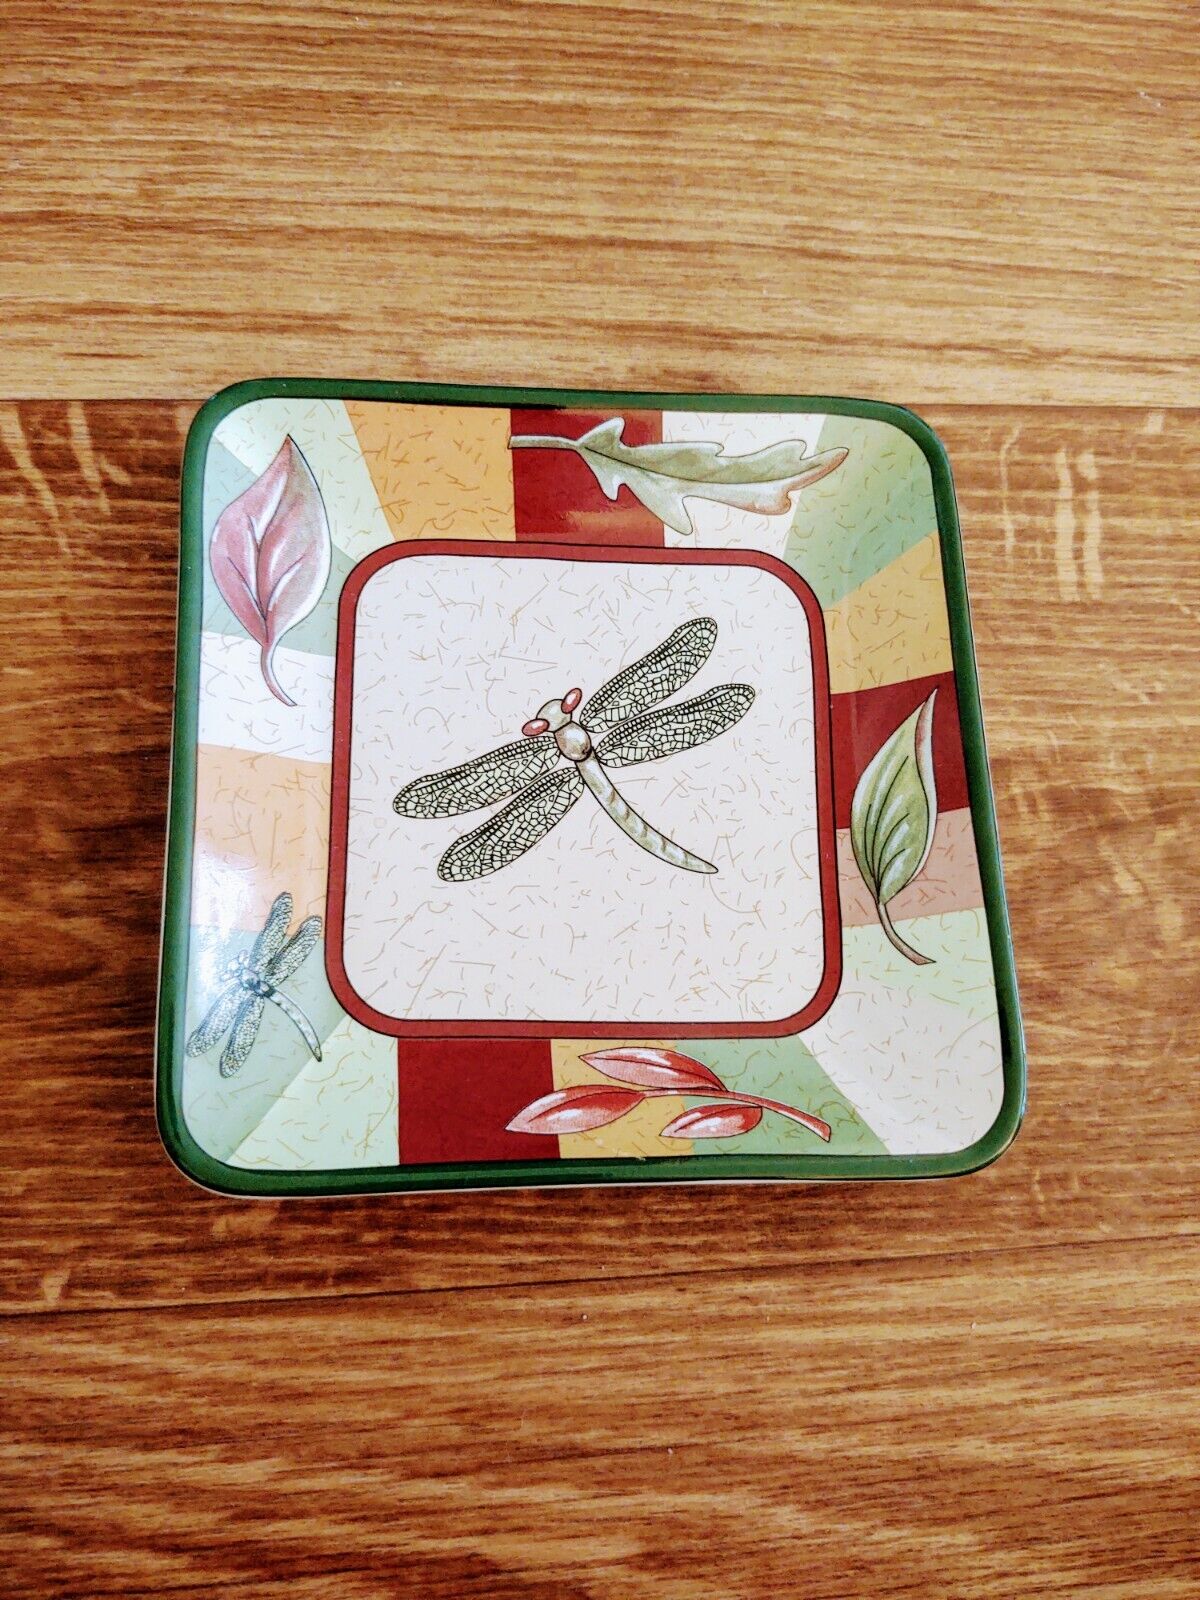 Vintage Retired Partylite Pillar Votive Candle Holder Tray With Dragonfly 5\